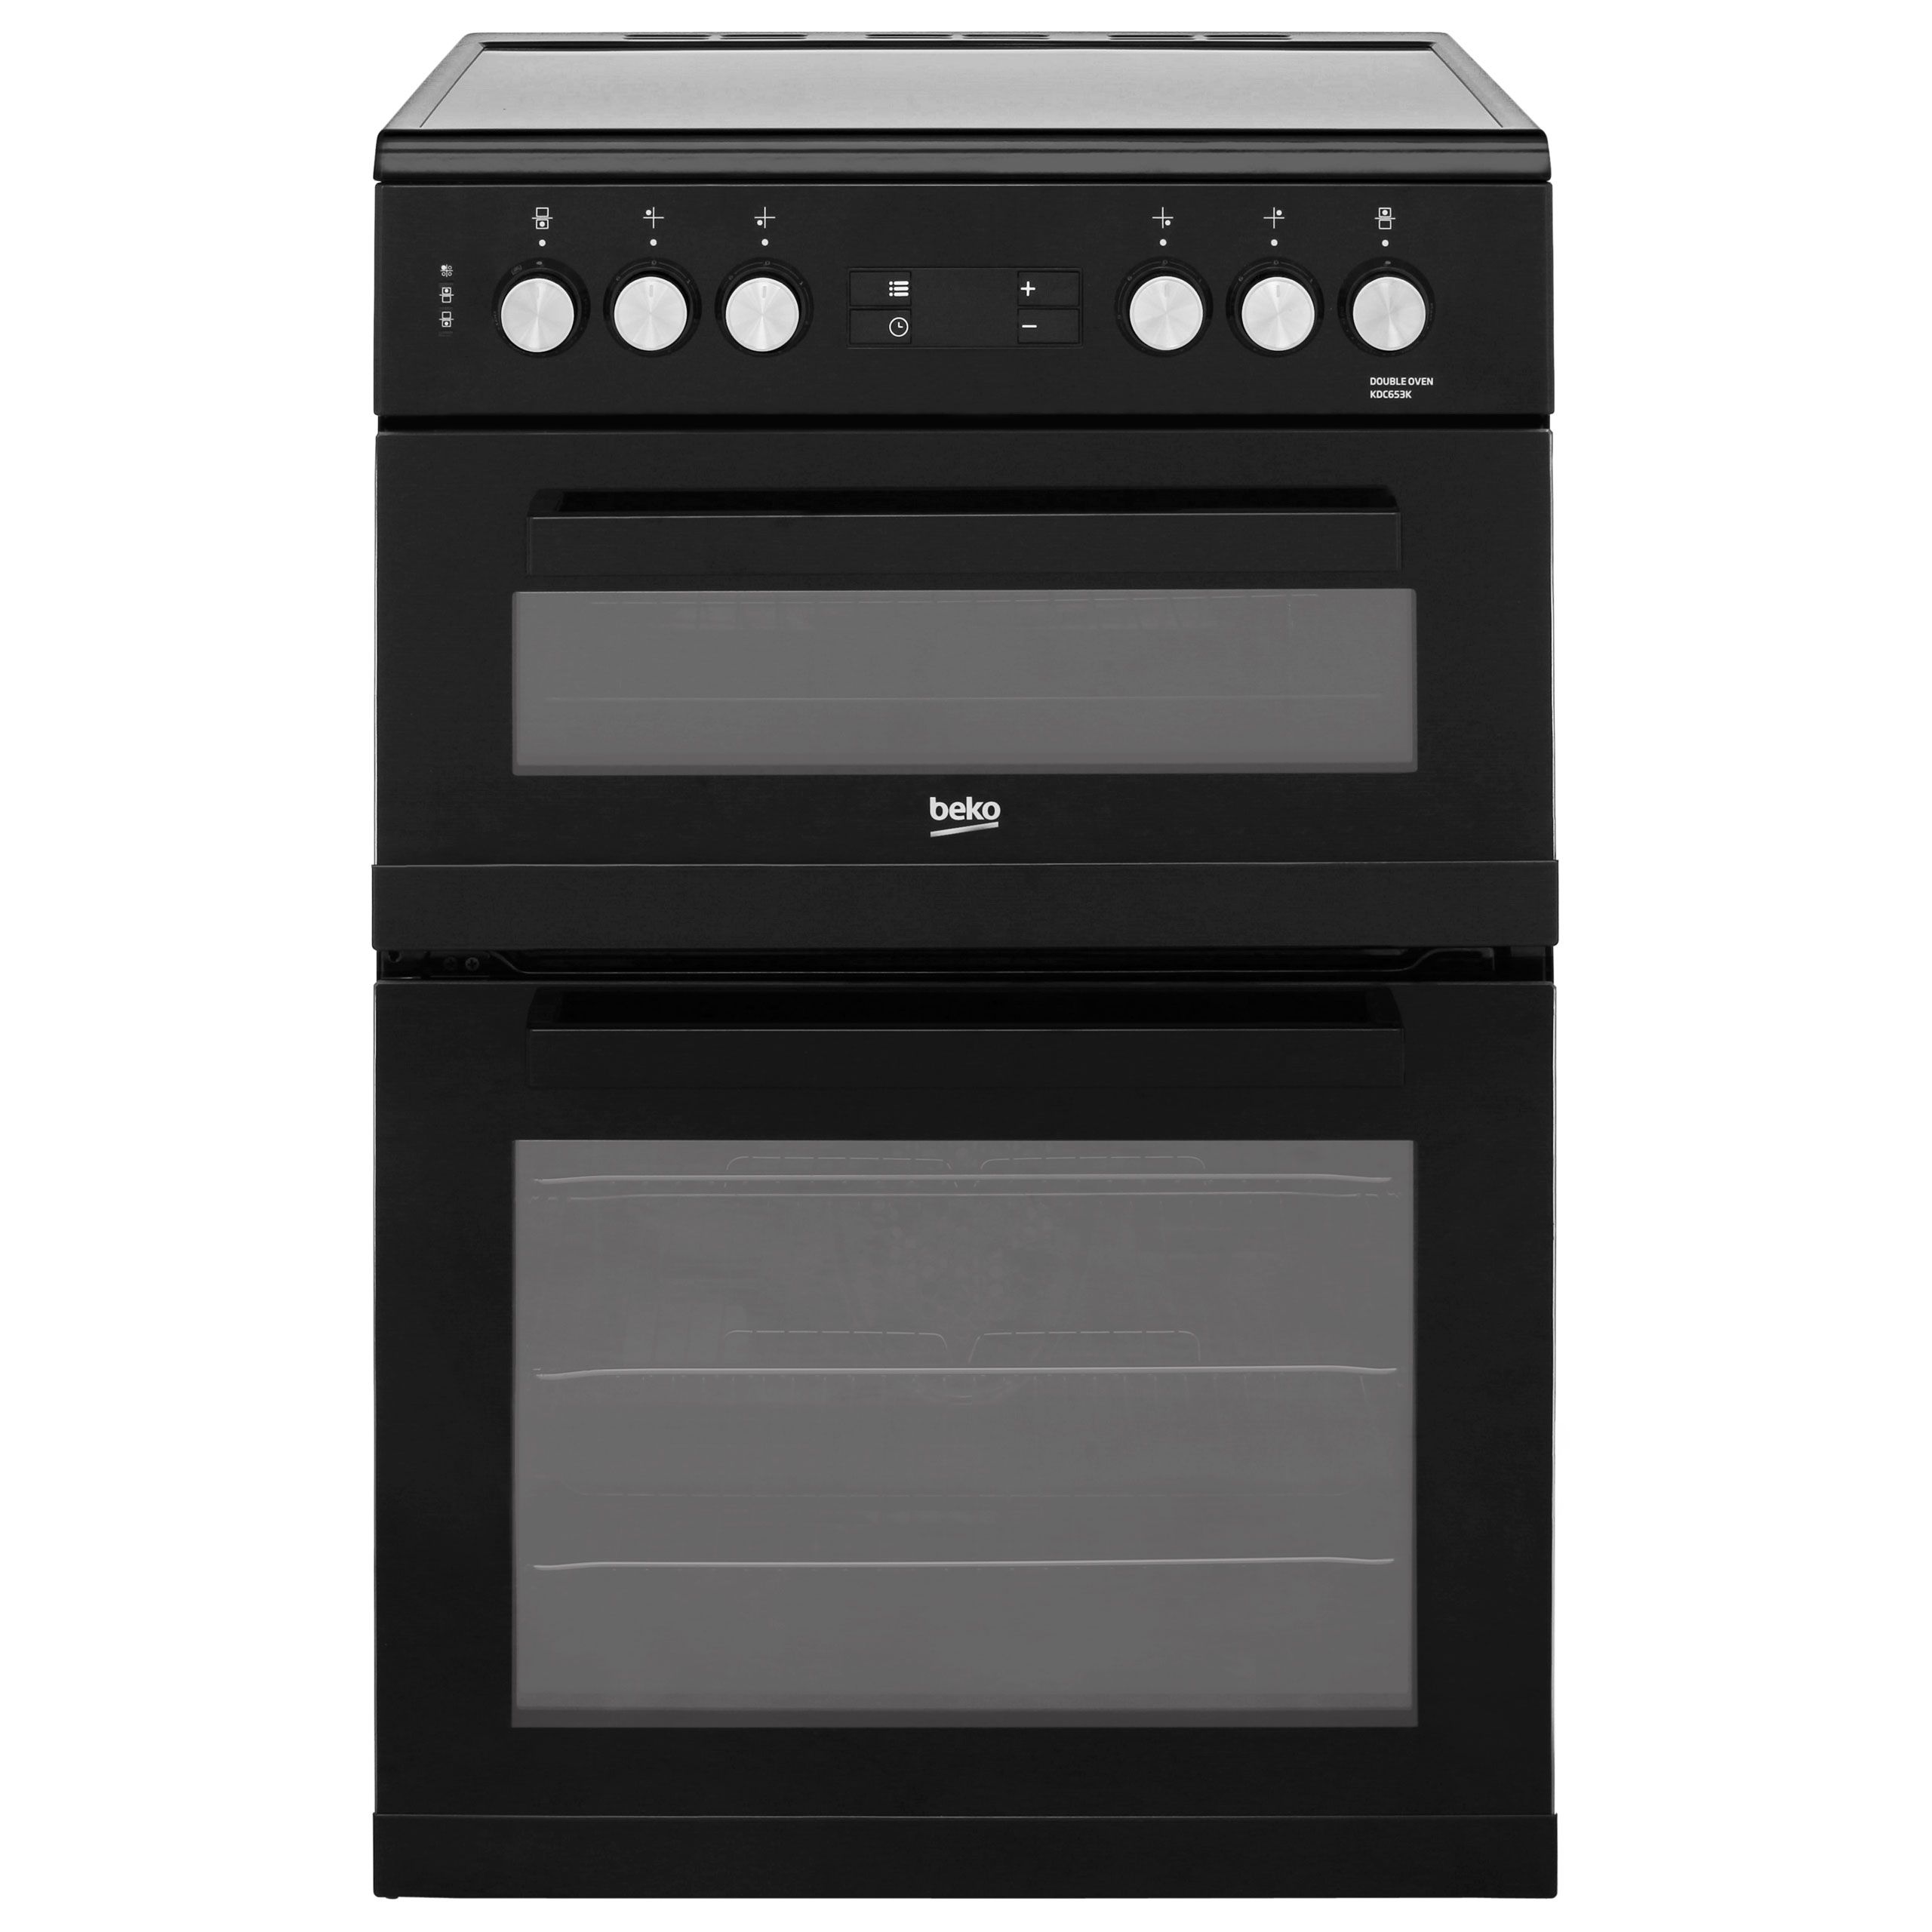 Beko KDC653K 60cm Electric Cooker with Ceramic Hob - Black - A/A Rated, Black